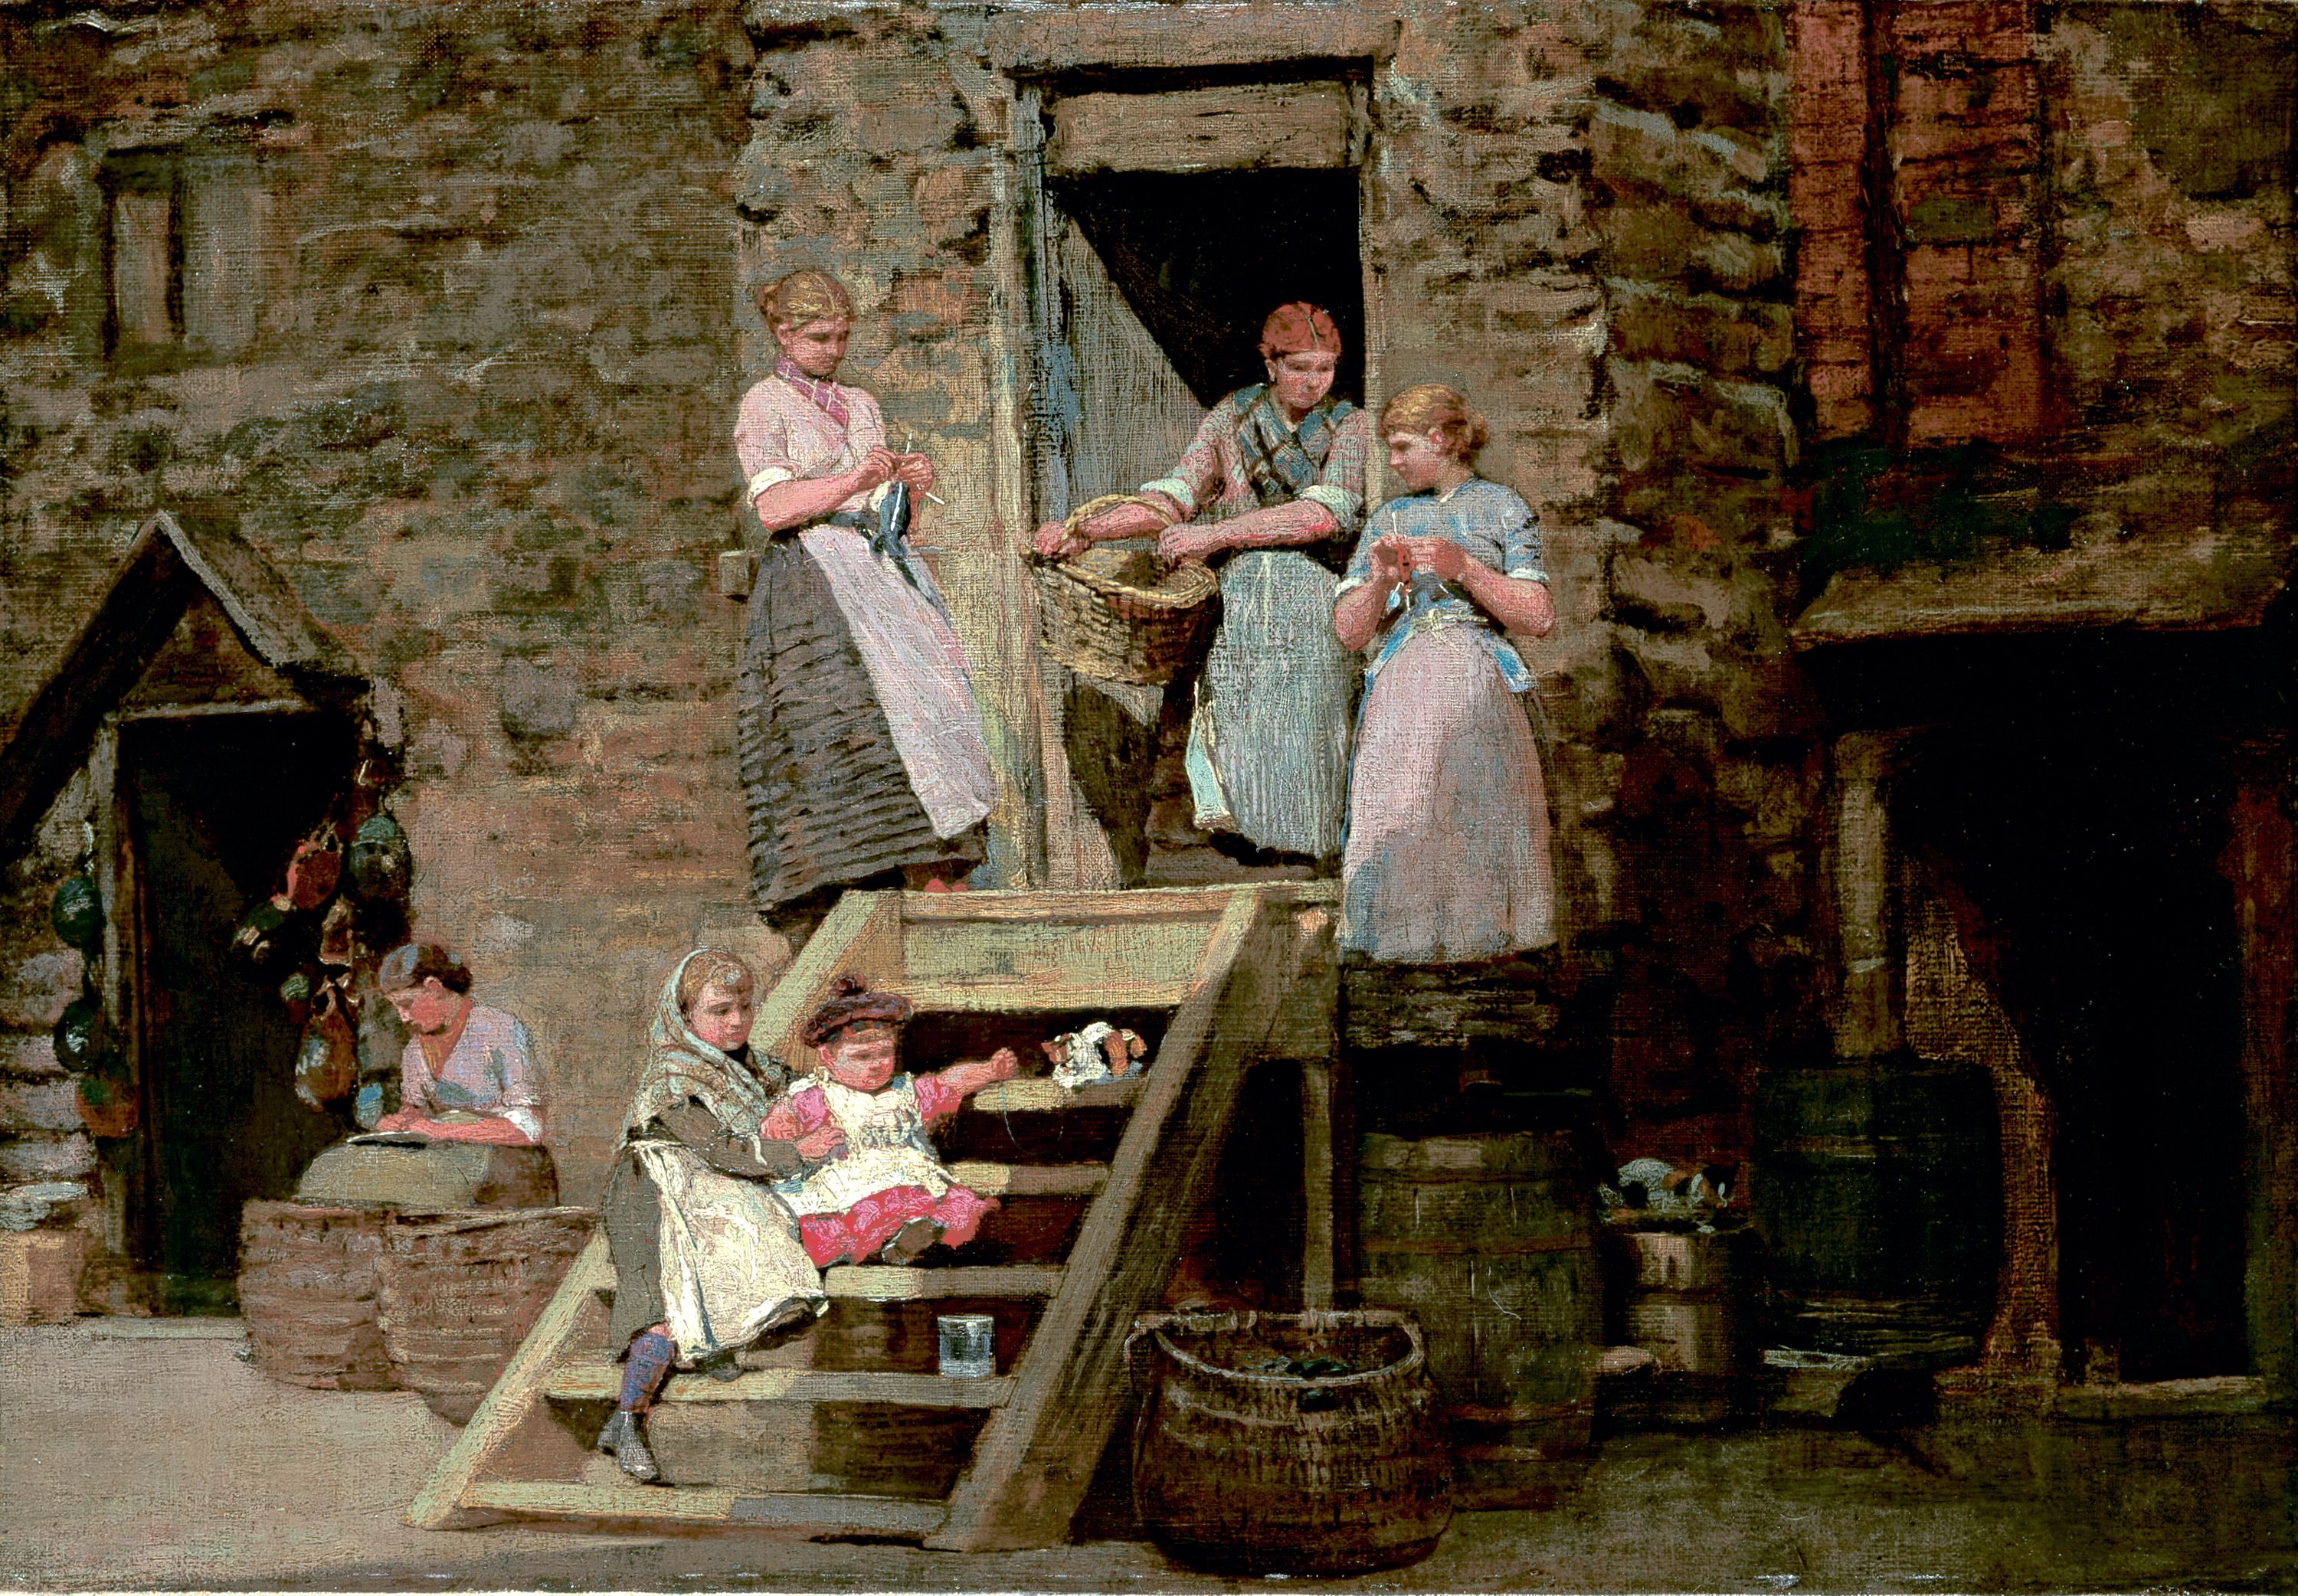 Women and children gathered around a front doorstep with stairs